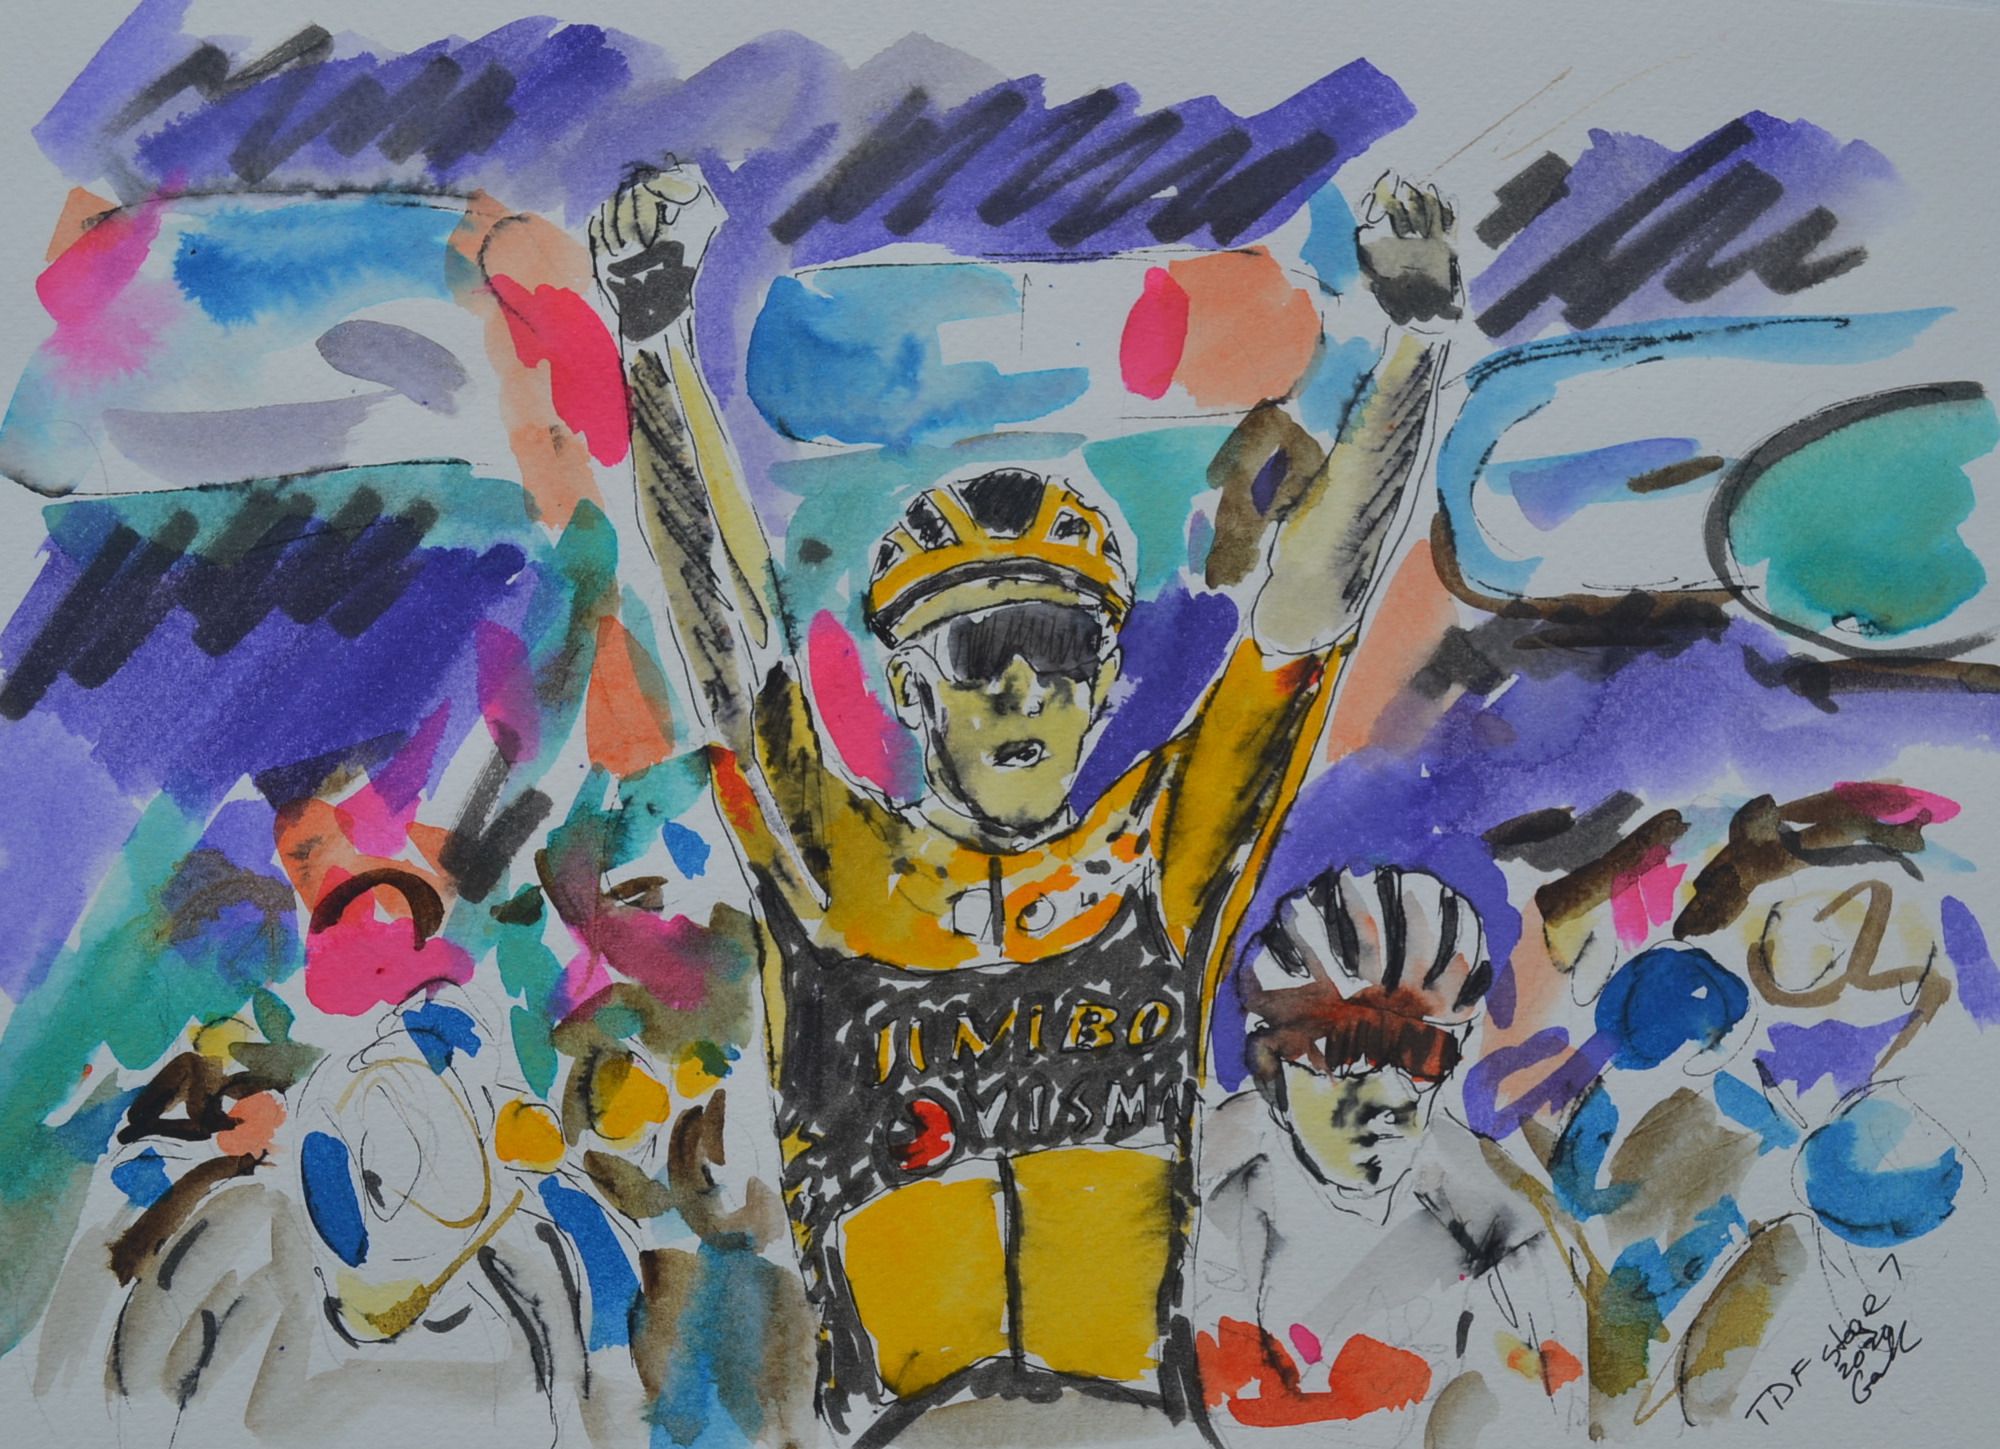 Tour de France Stage 7 by Garth Bayley